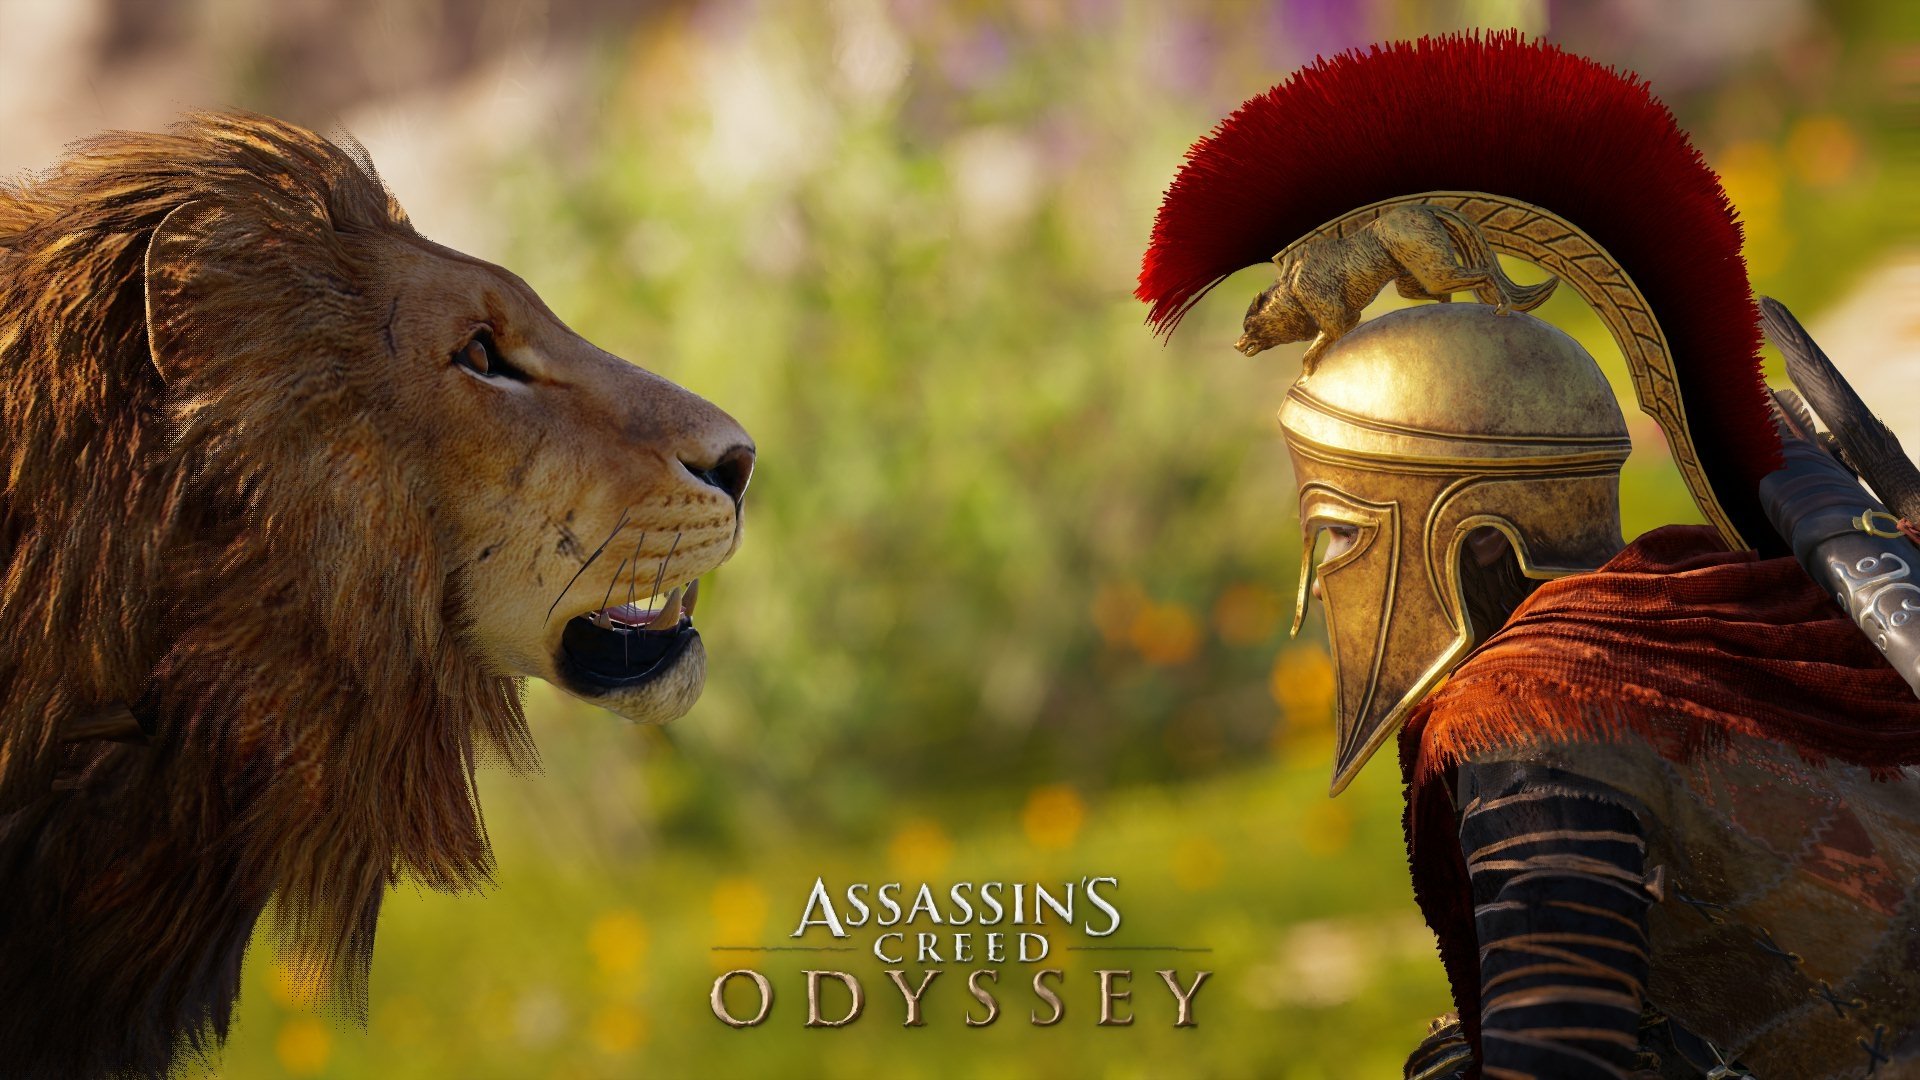 Zendha Assassins Creed Odyssey Iphone ac odyssey mobile HD phone wallpaper   Pxfuel